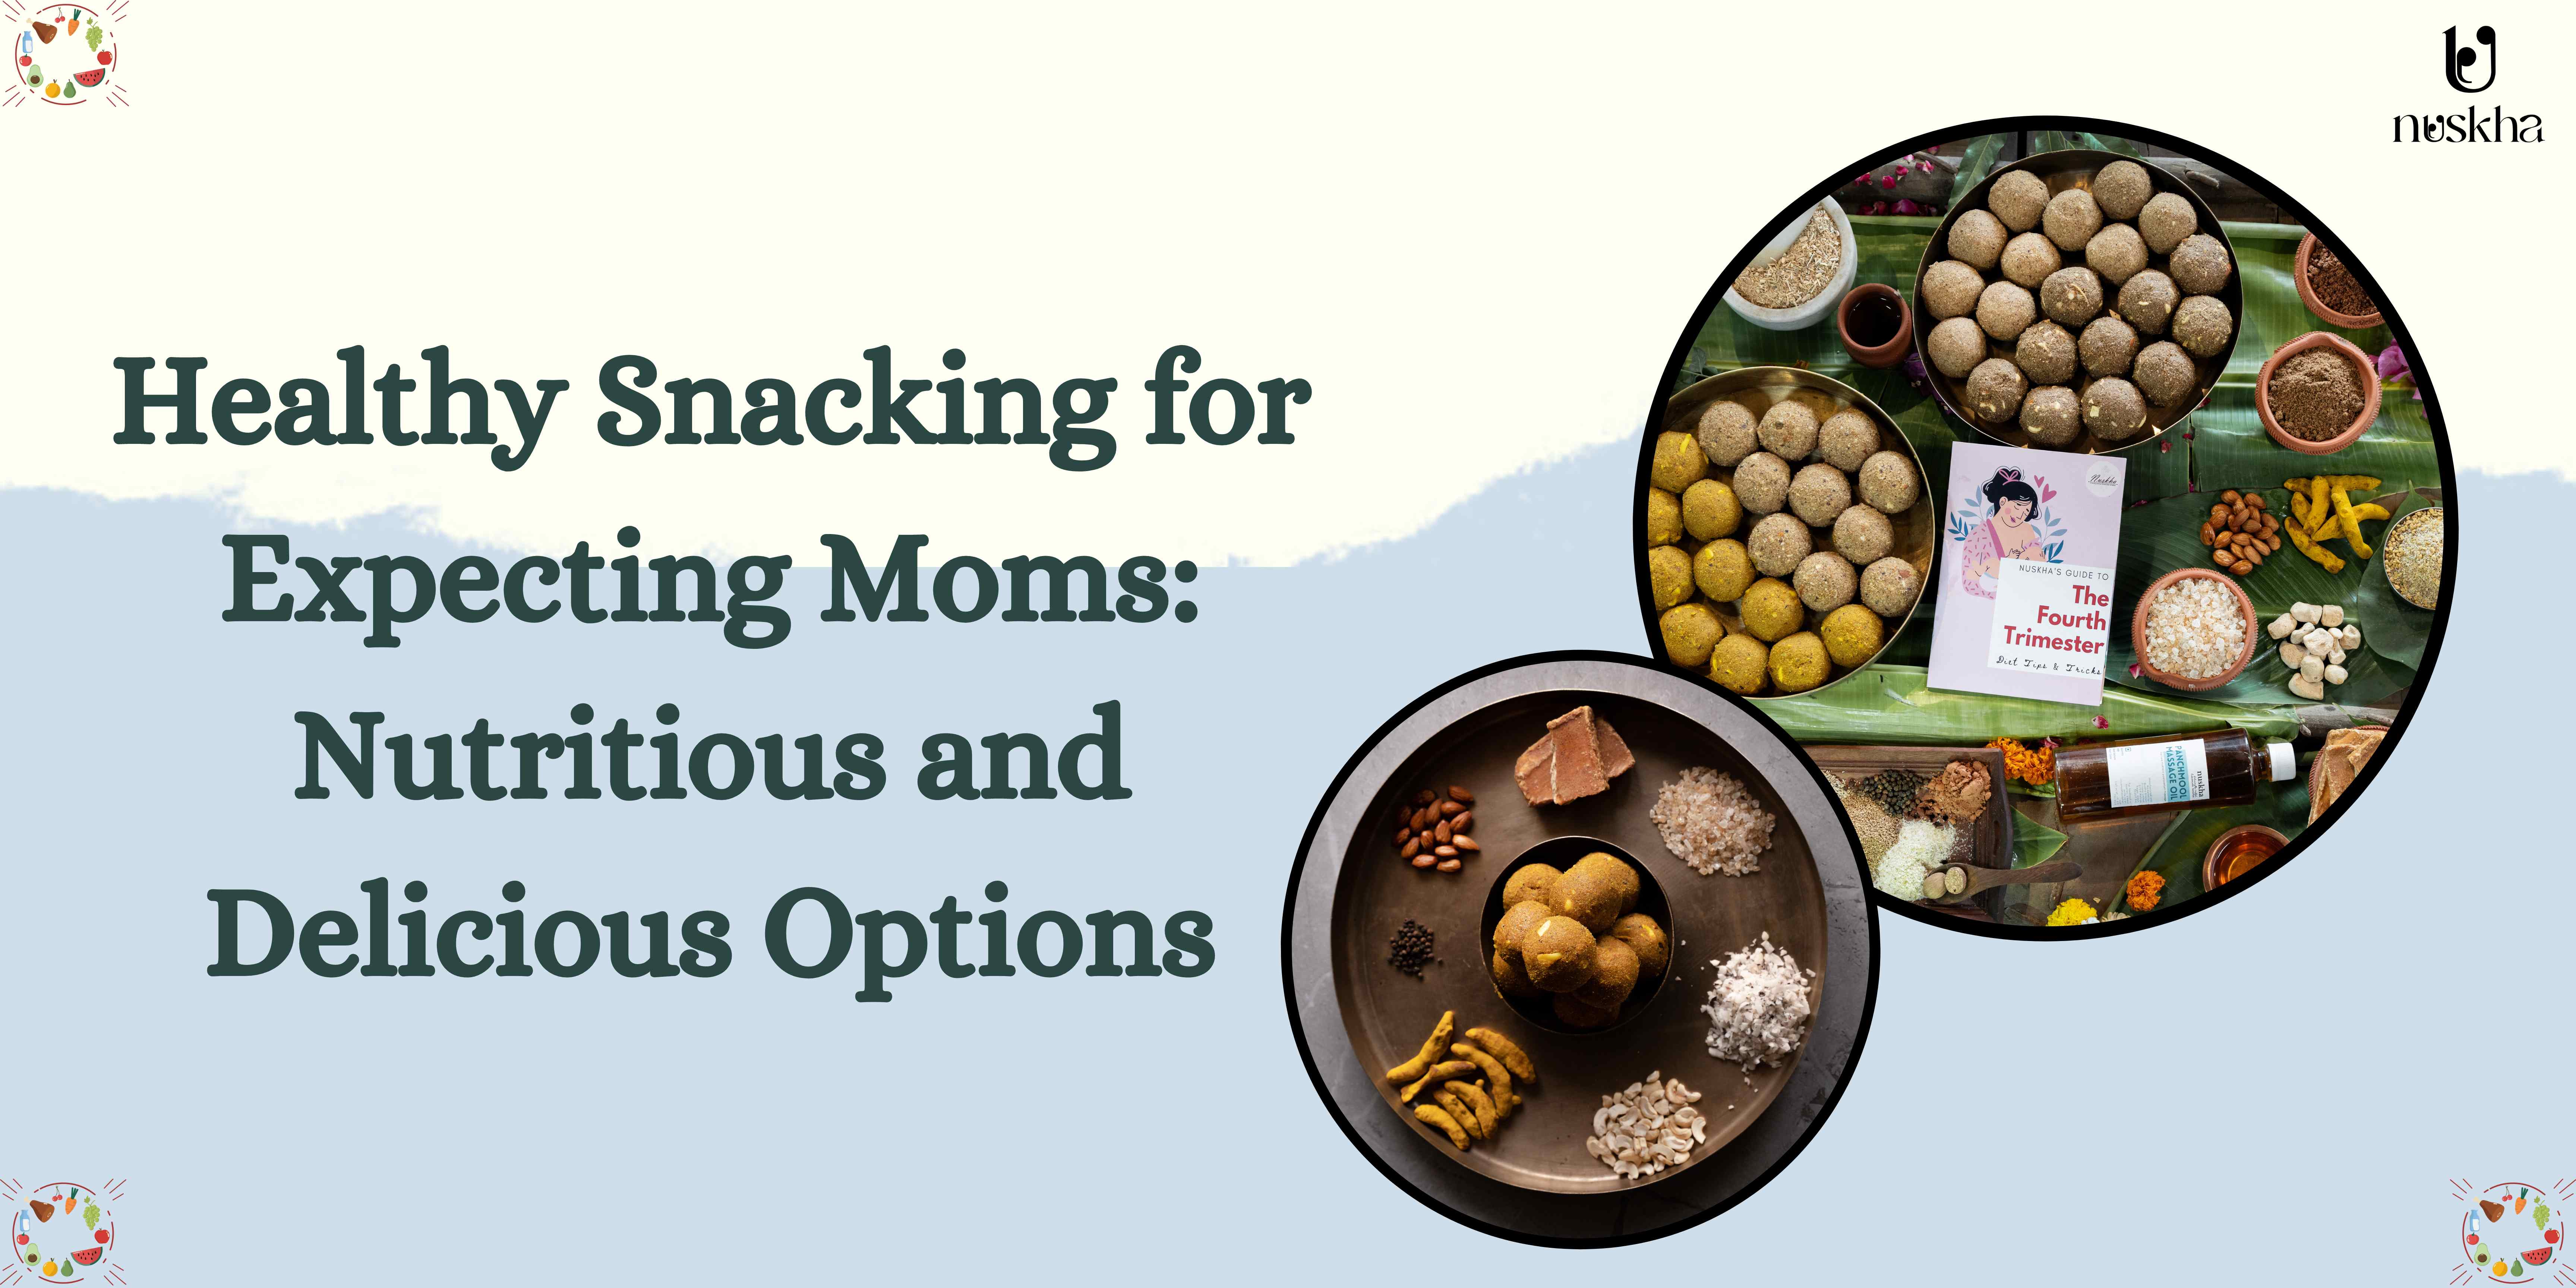 Healthy Snacking for Expecting Moms: Nutritious and Delicious Options